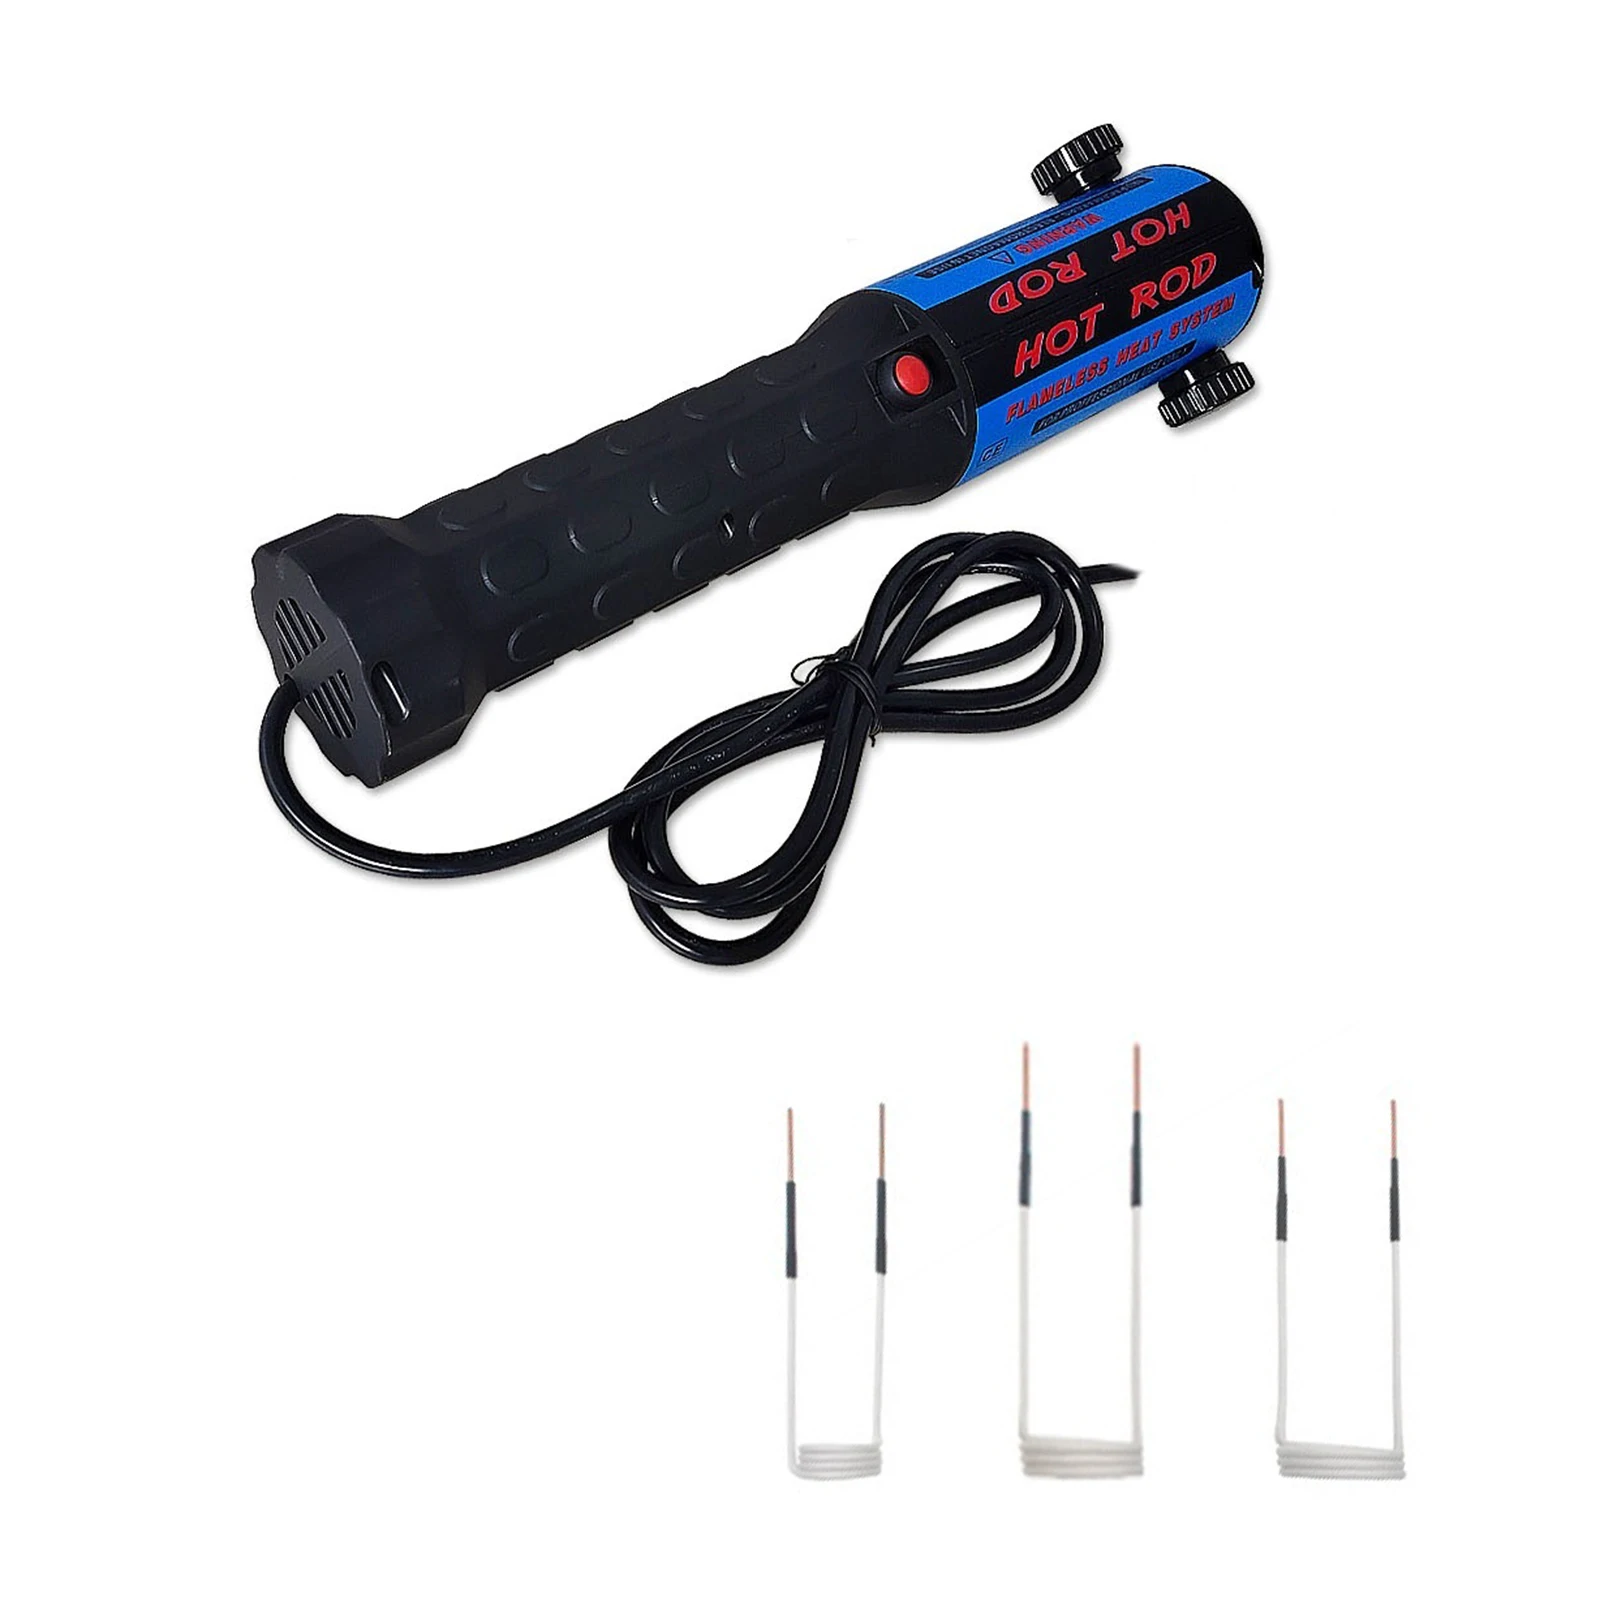 

Electromagnetic Induction Heater Kit 1000W 110V 220V Automotive Flameless Heat Induction Heater with 3 Coils Car Repair Tools